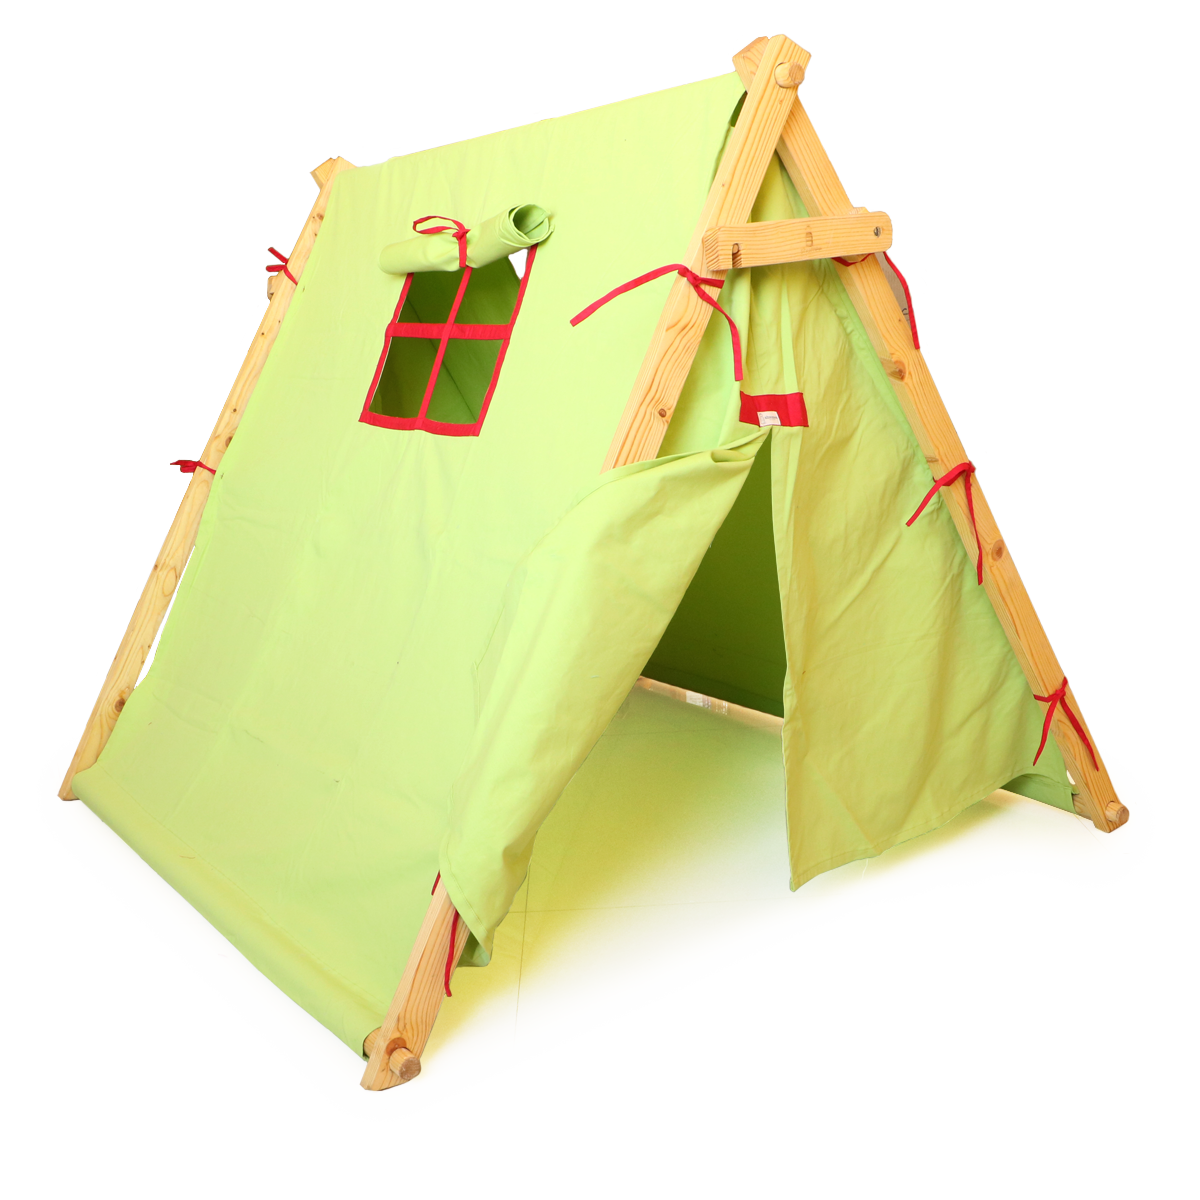 Tent PNG image free Download 